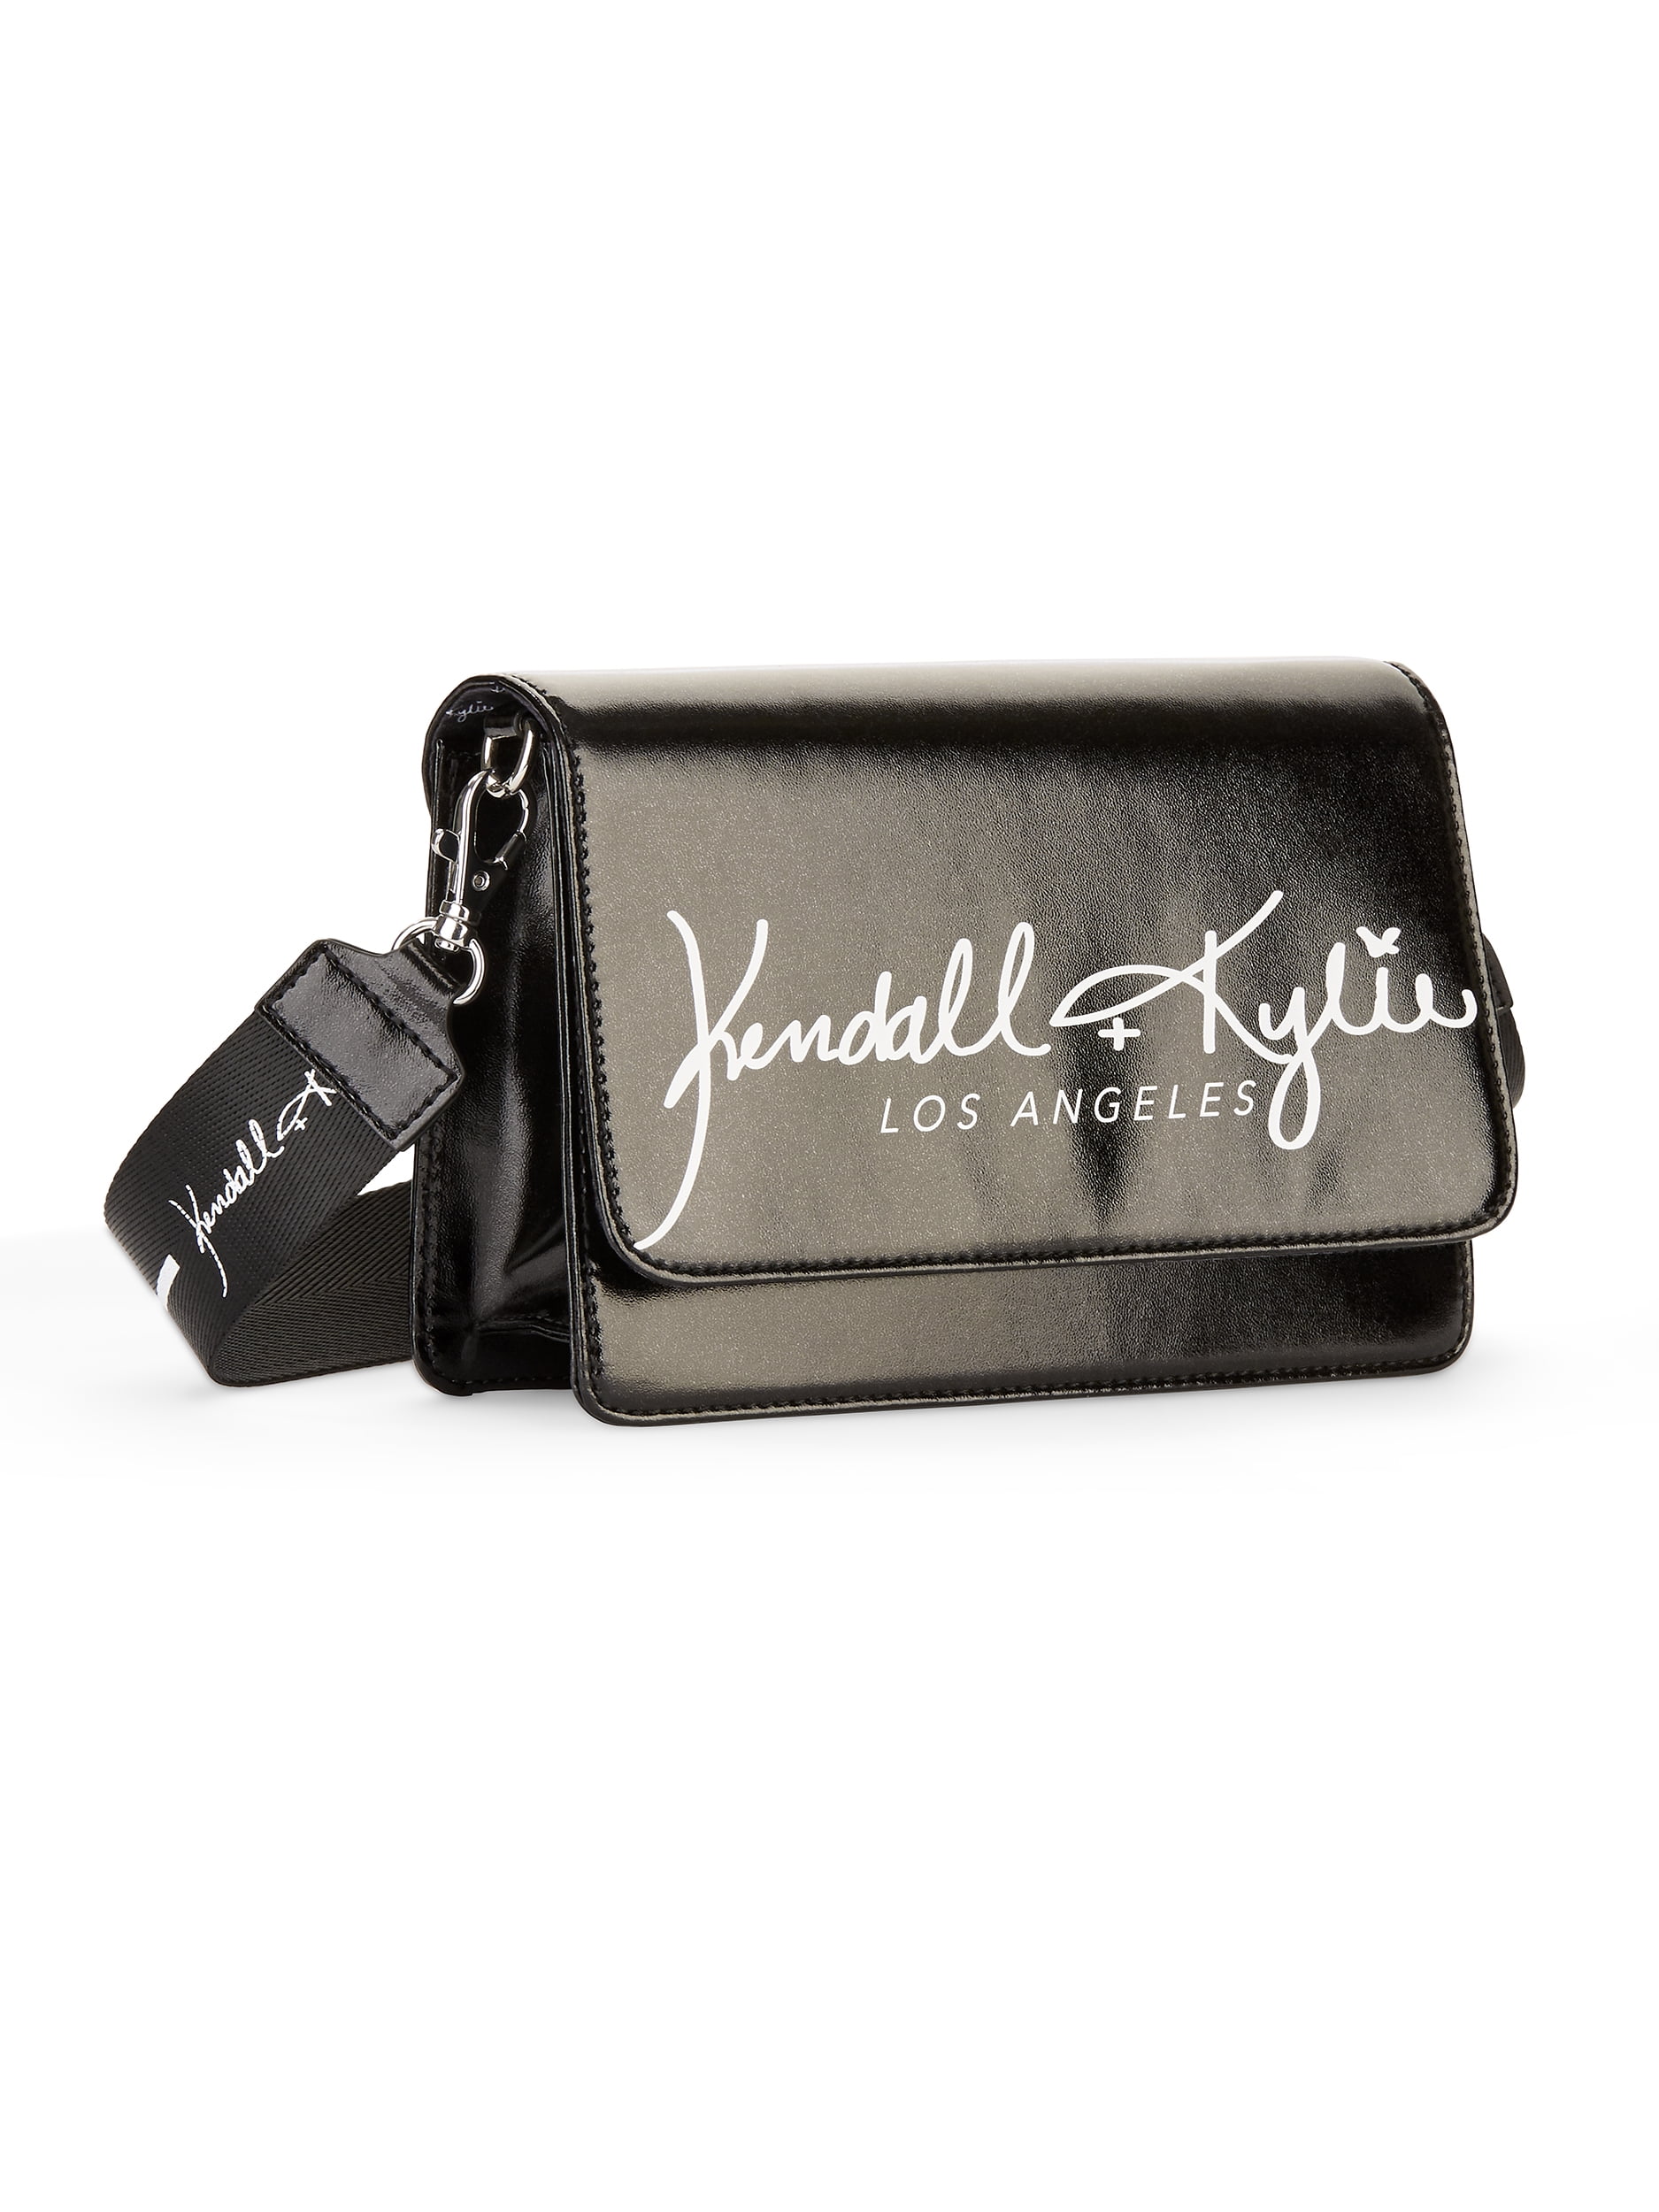 Kendall & Kylie, Bags, Kendall Kylie Silver Duffle Bag Carry On Crossbody